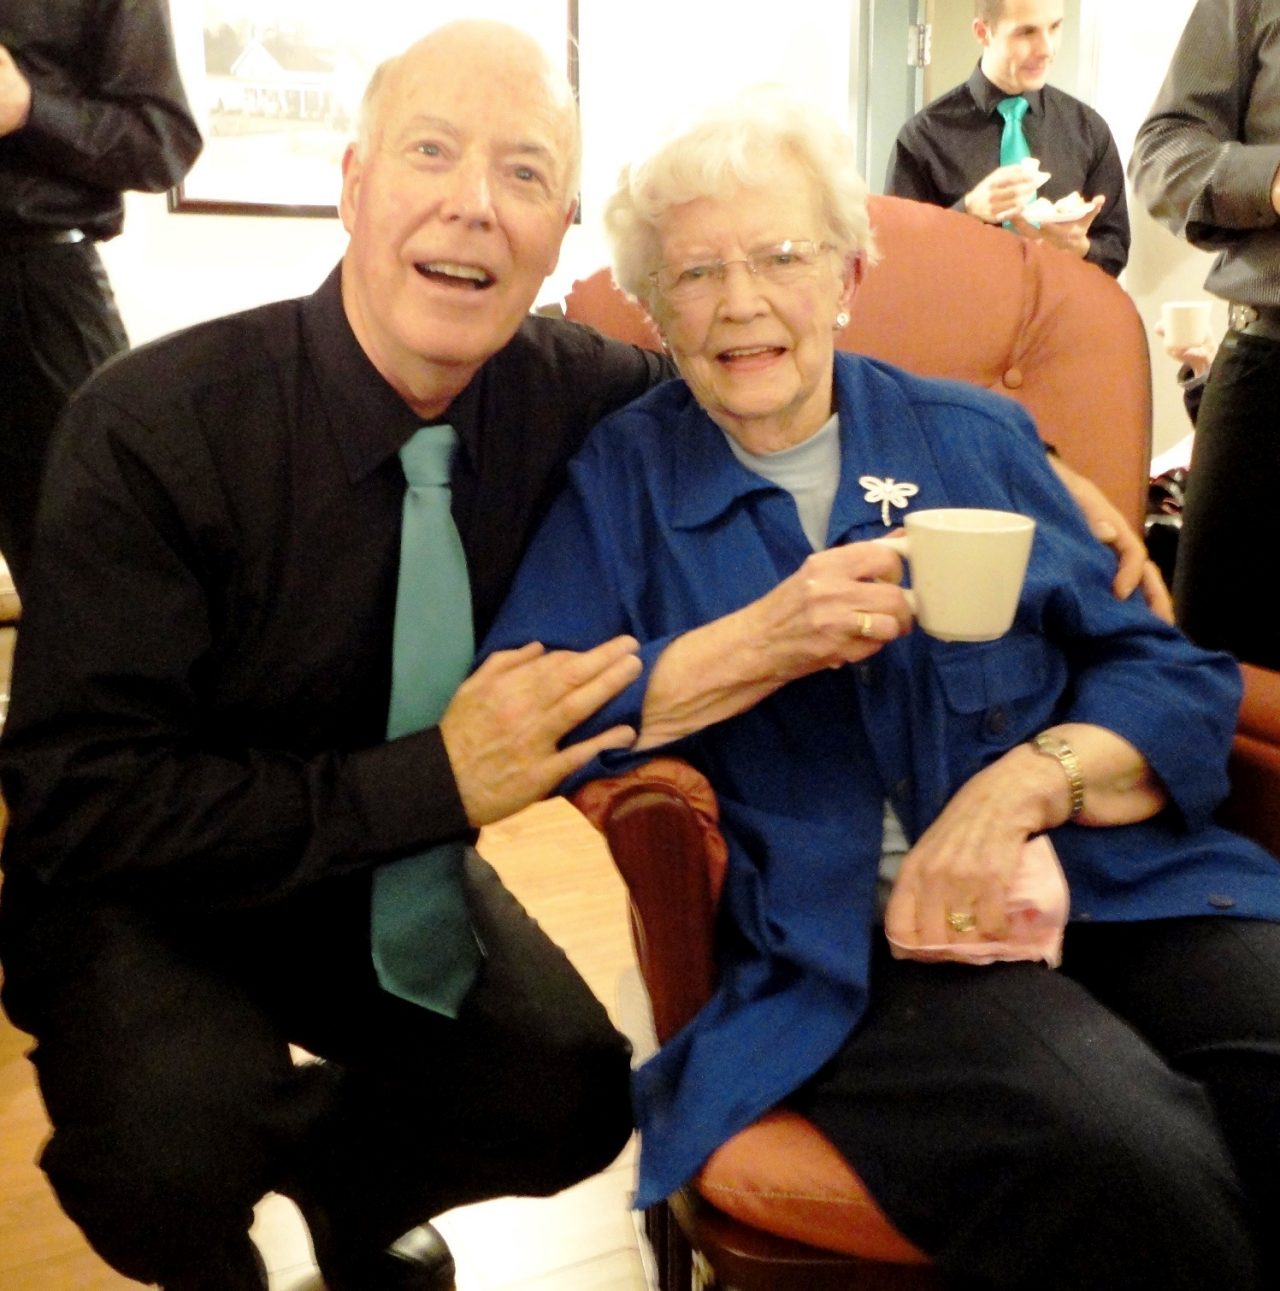 A man wearing a black shirt and green tie squats next to a seatd woman wearing a blue jacket holding a much